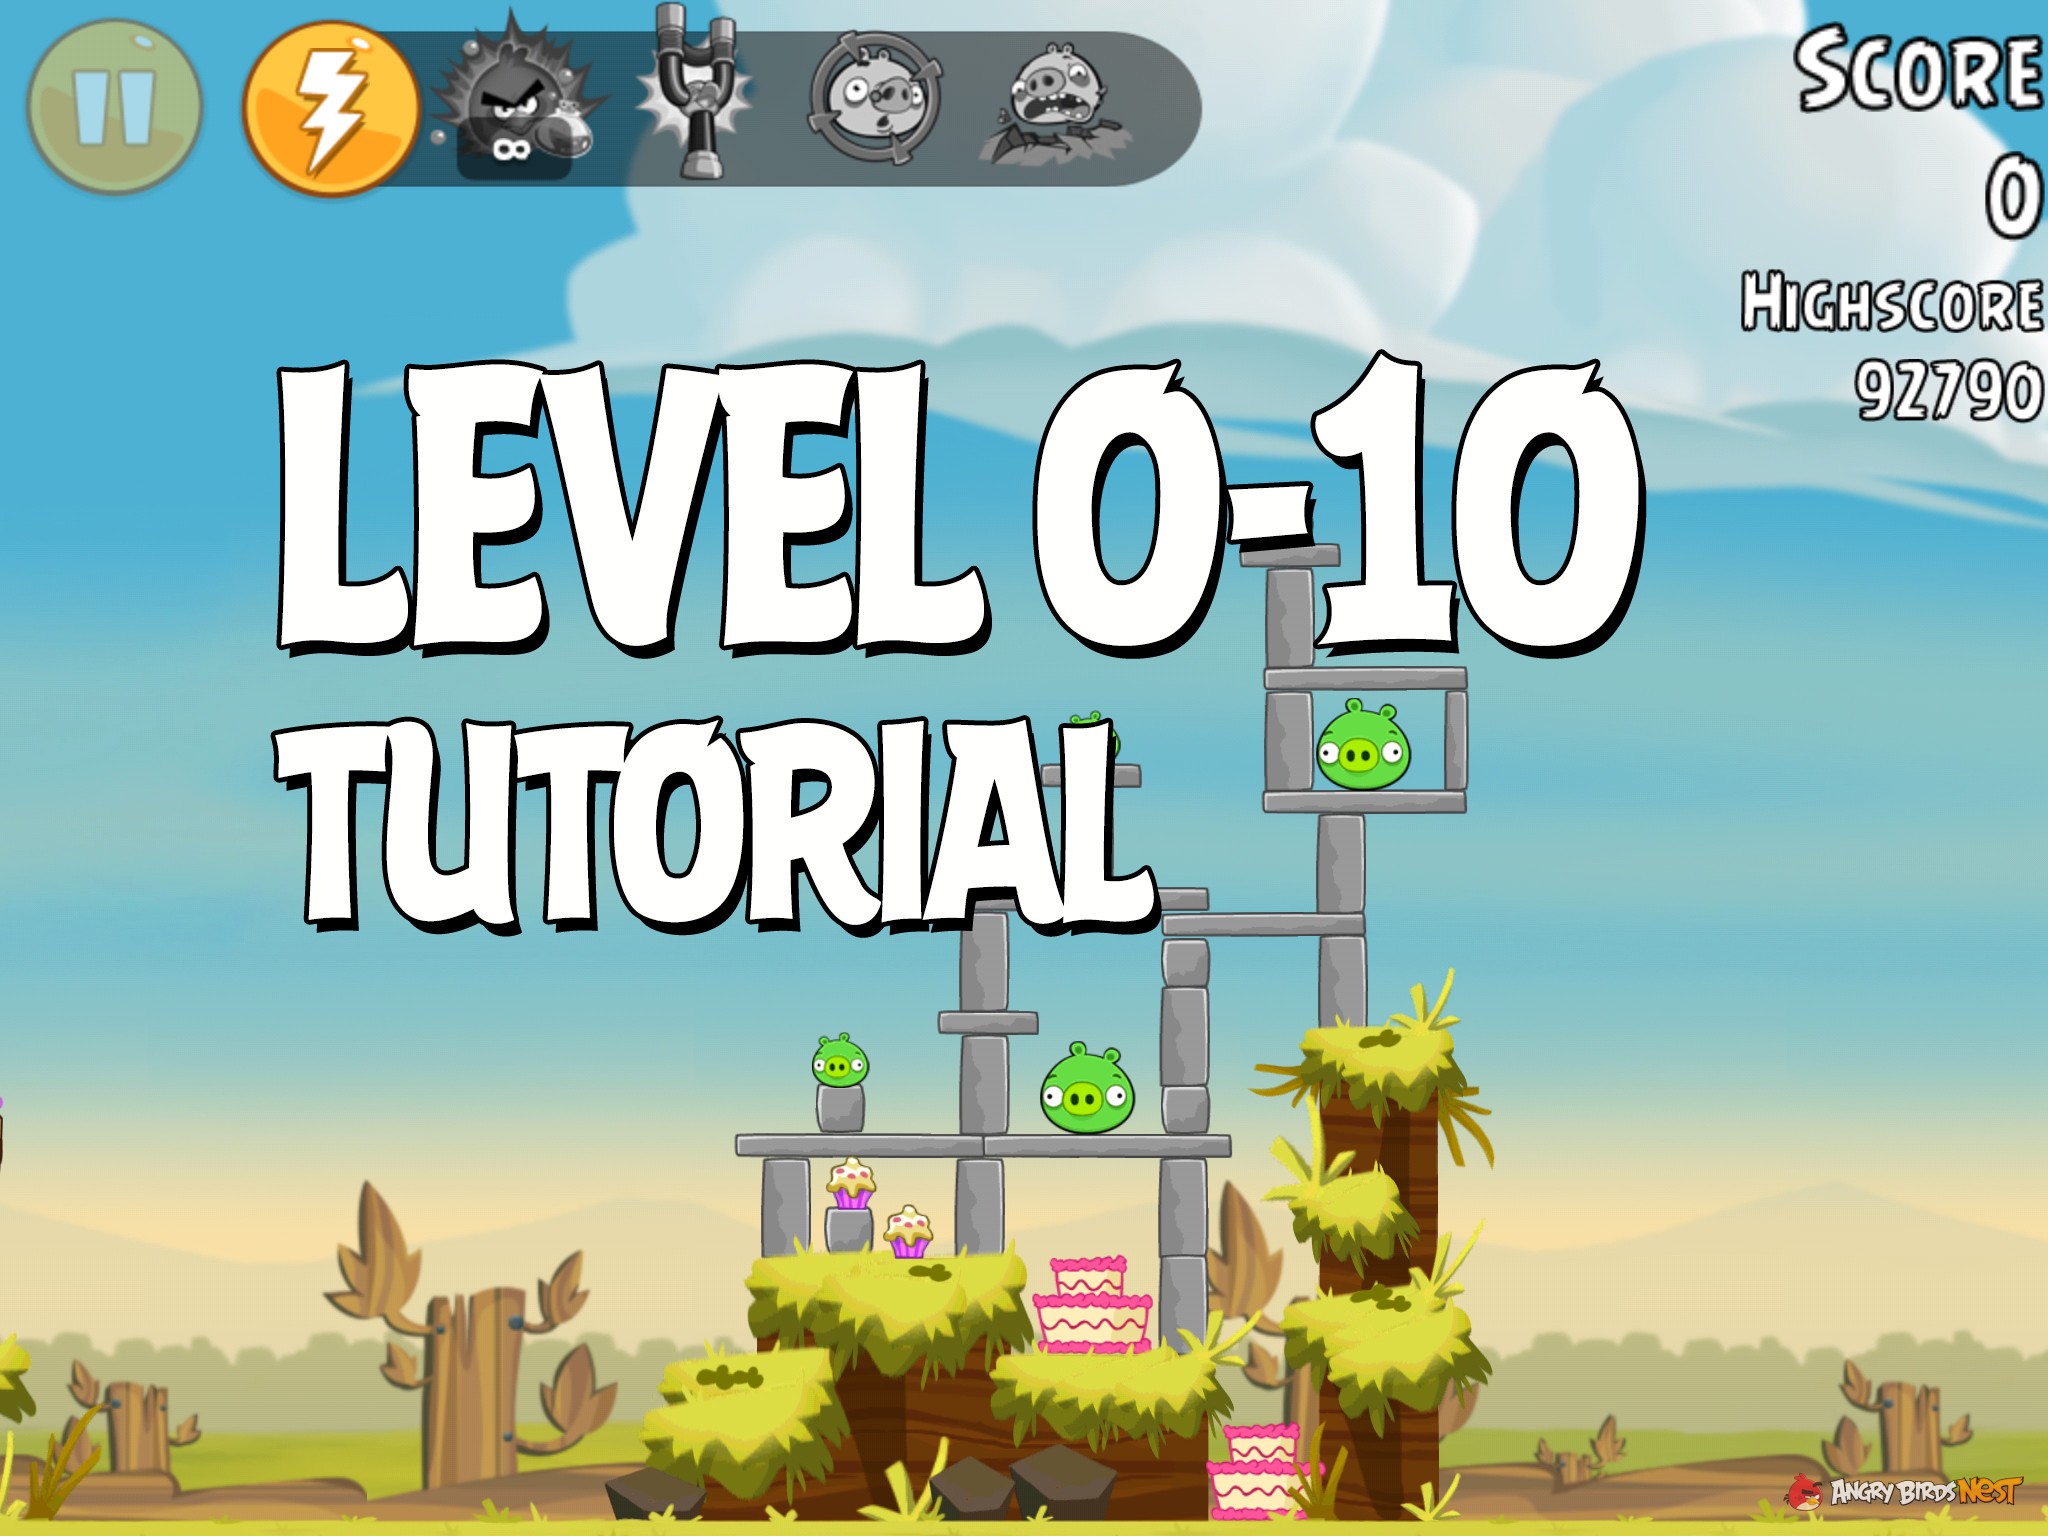 Angry-Birds-Tutorial-Level-0-10